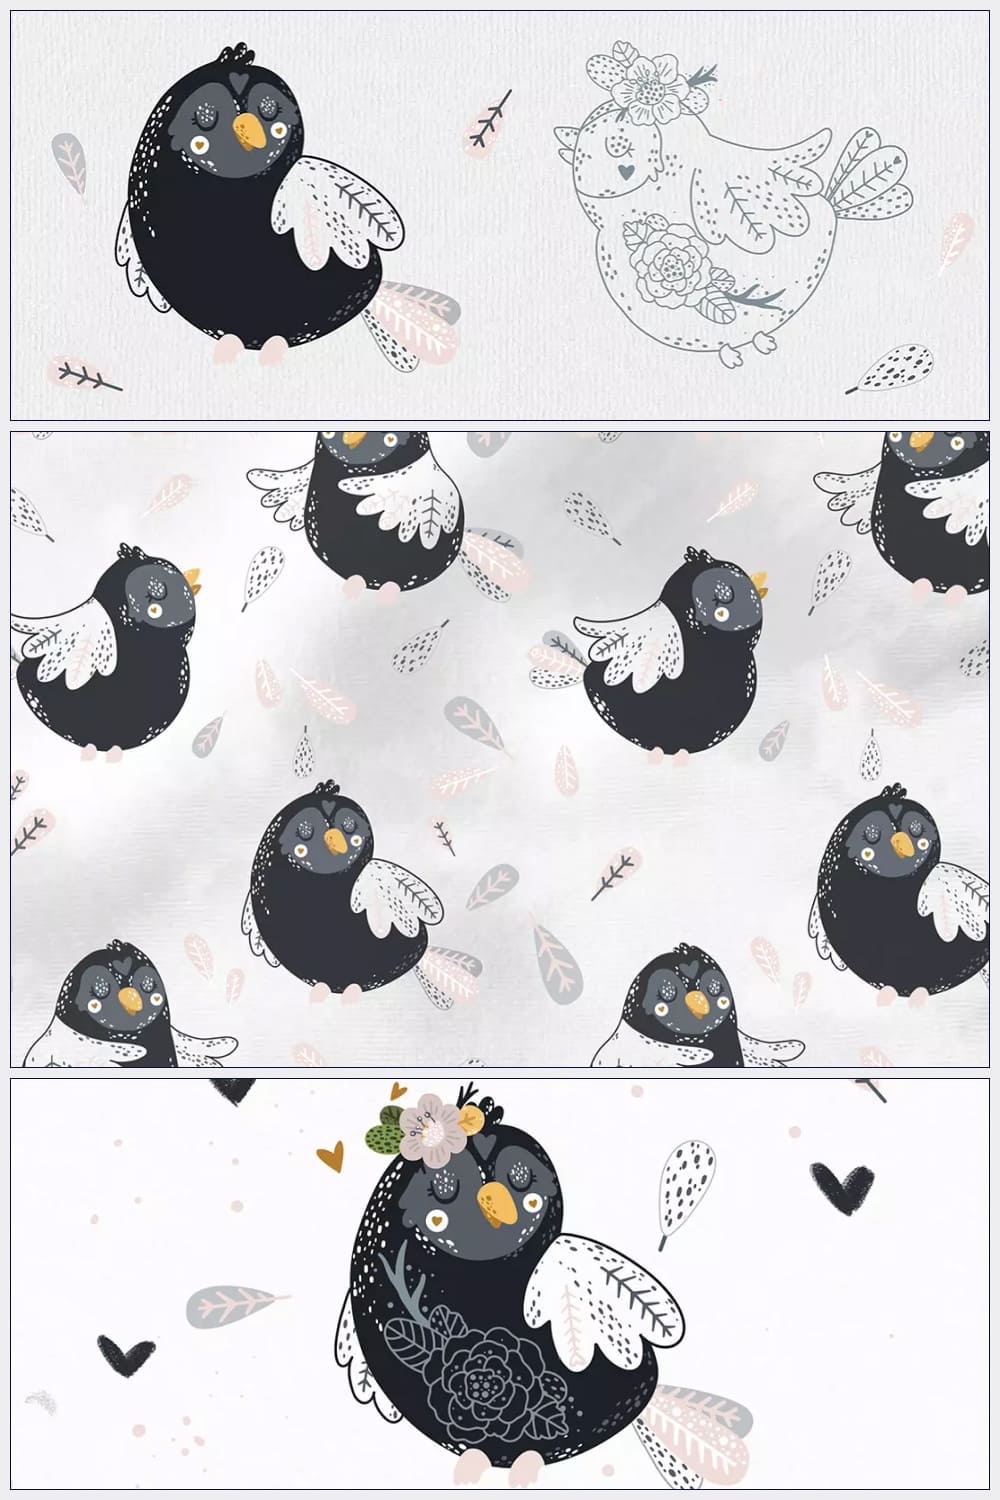 Black and white birds in not usual drawing technic.